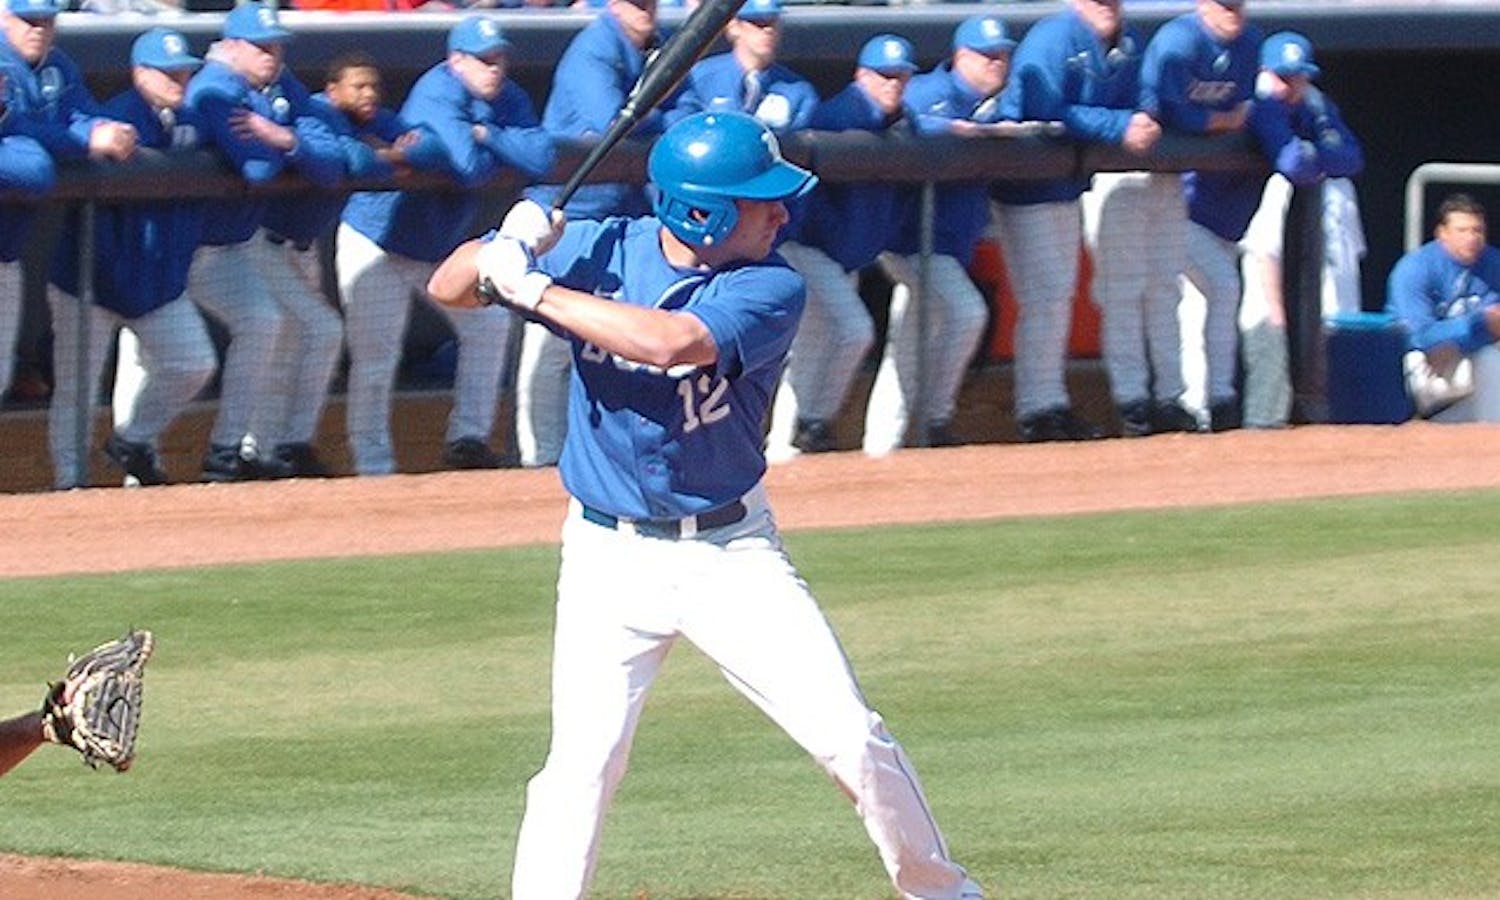 Jake Lemmerman scored the tying run in Duke’s come-from-behind win over North Carolina Sunday.